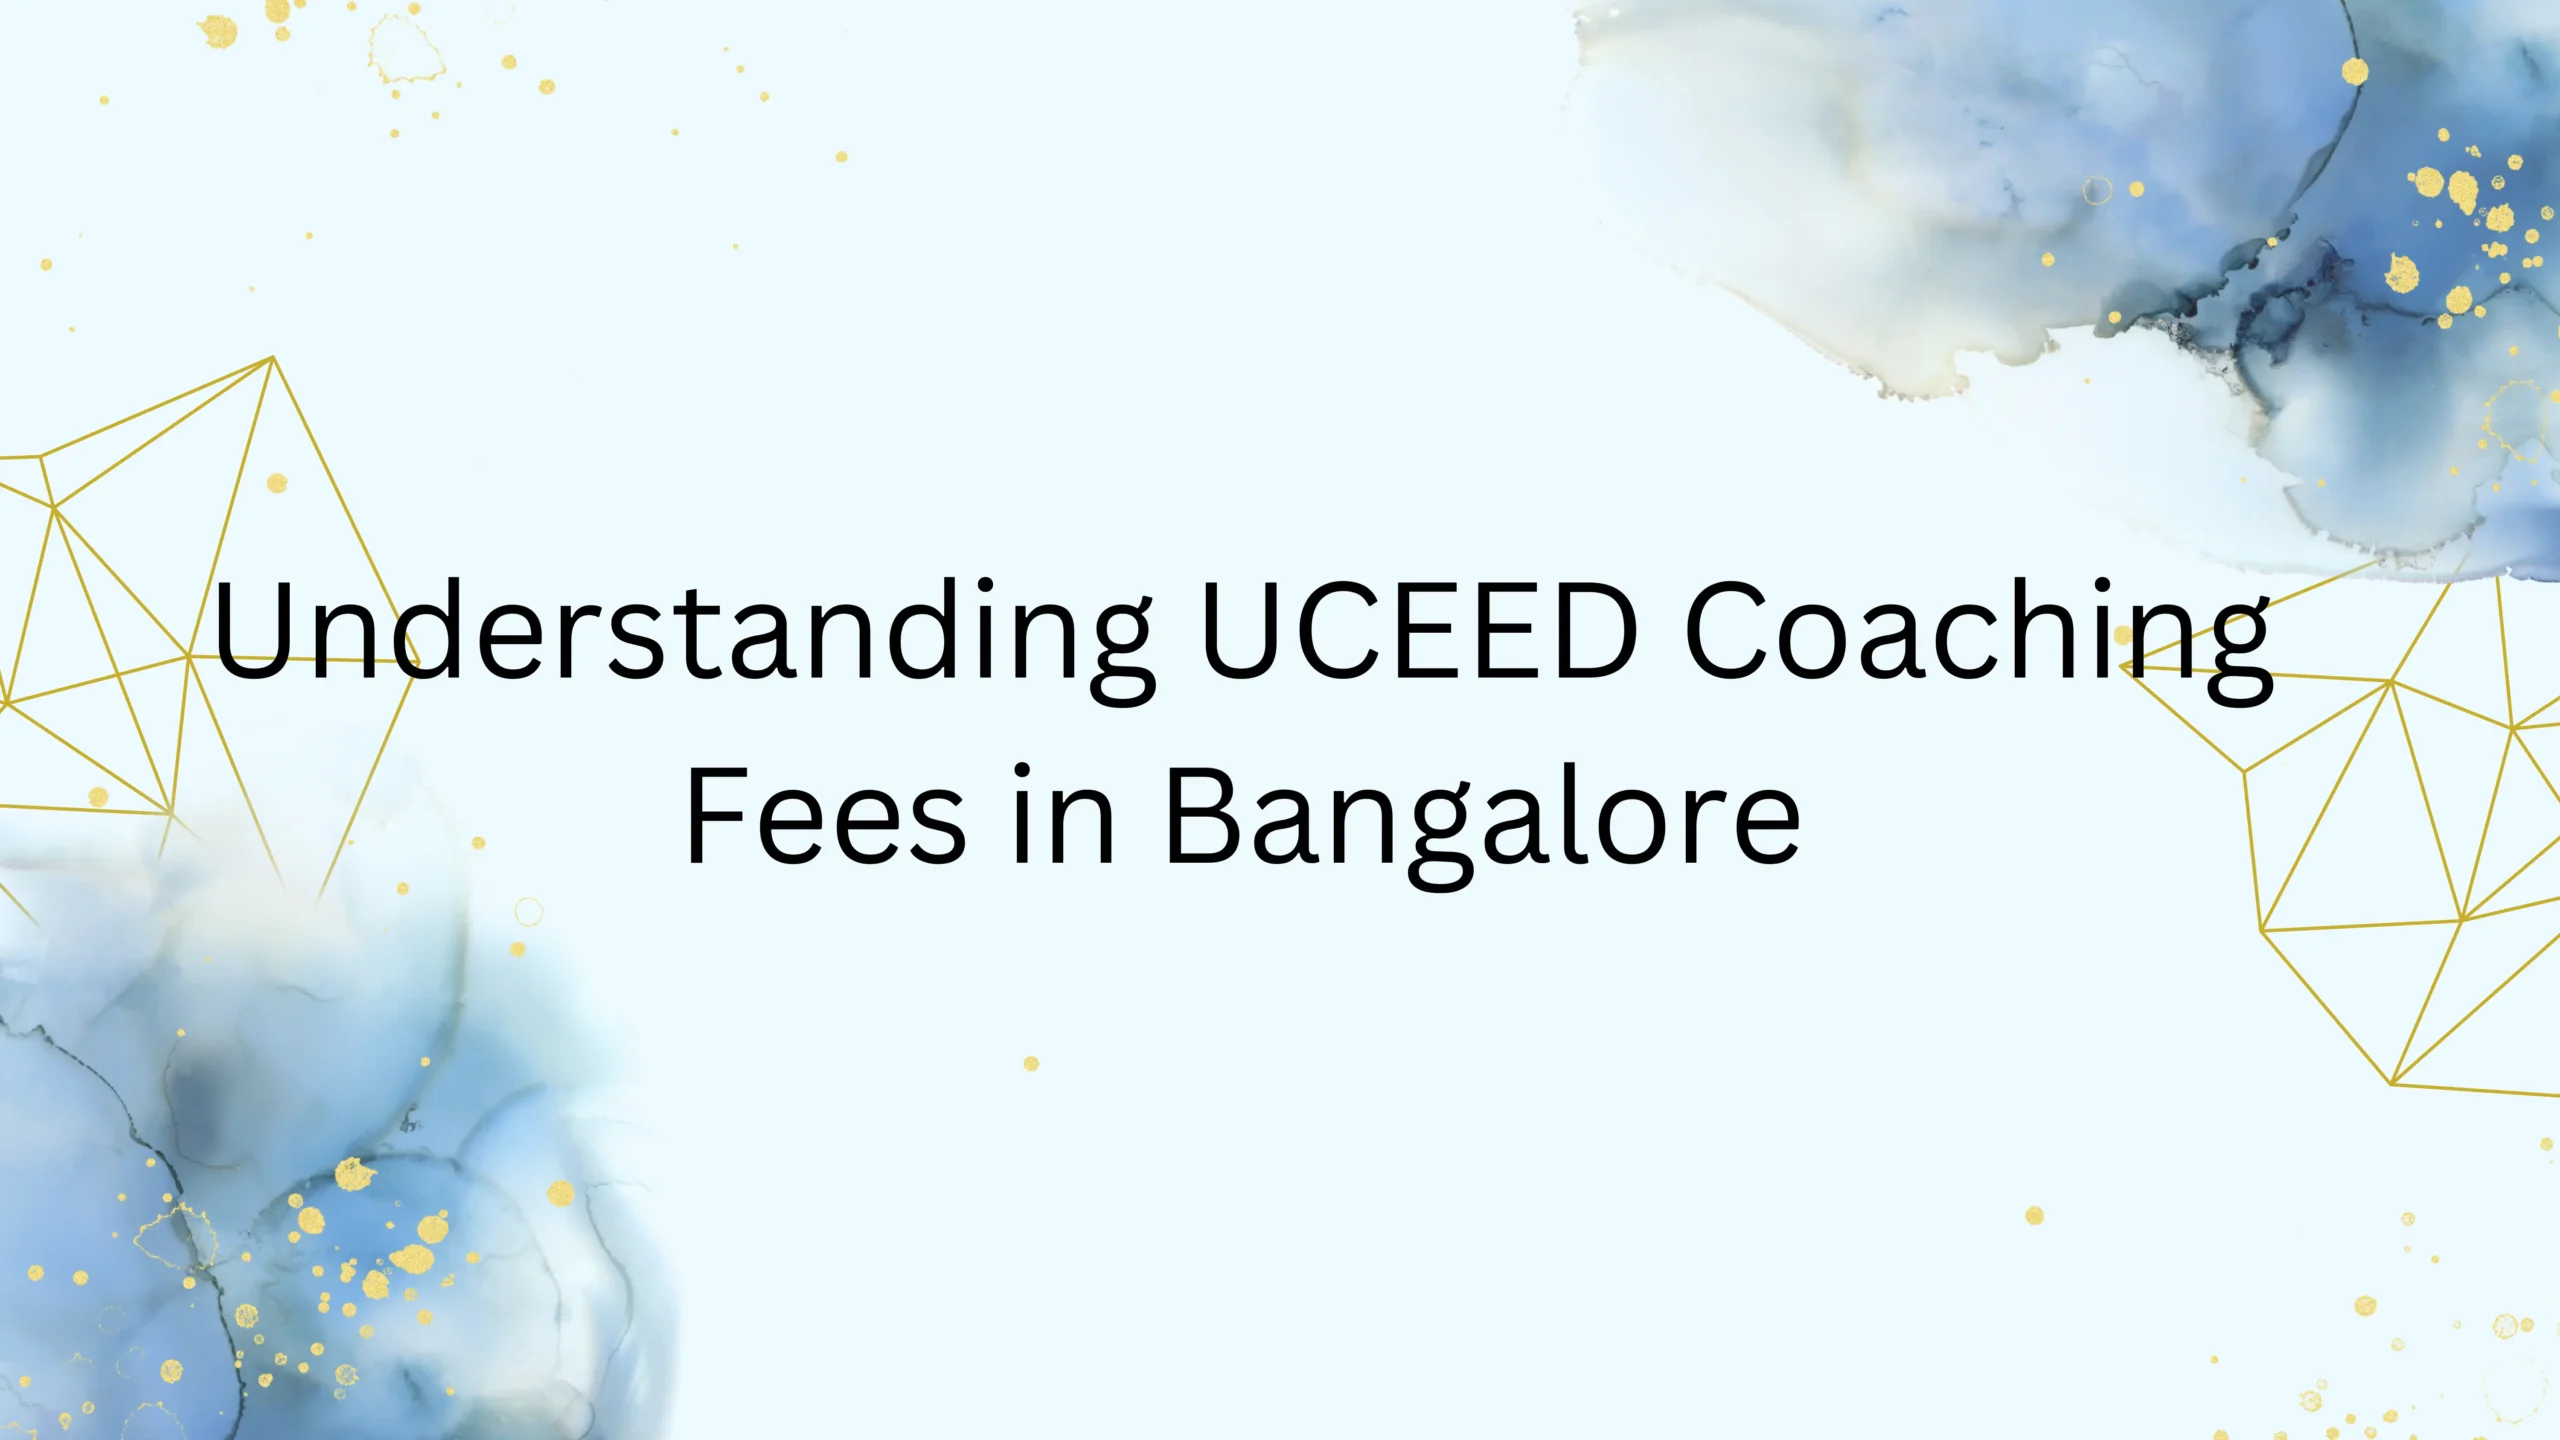 Understanding UCEED Coaching Fees in Bangalore